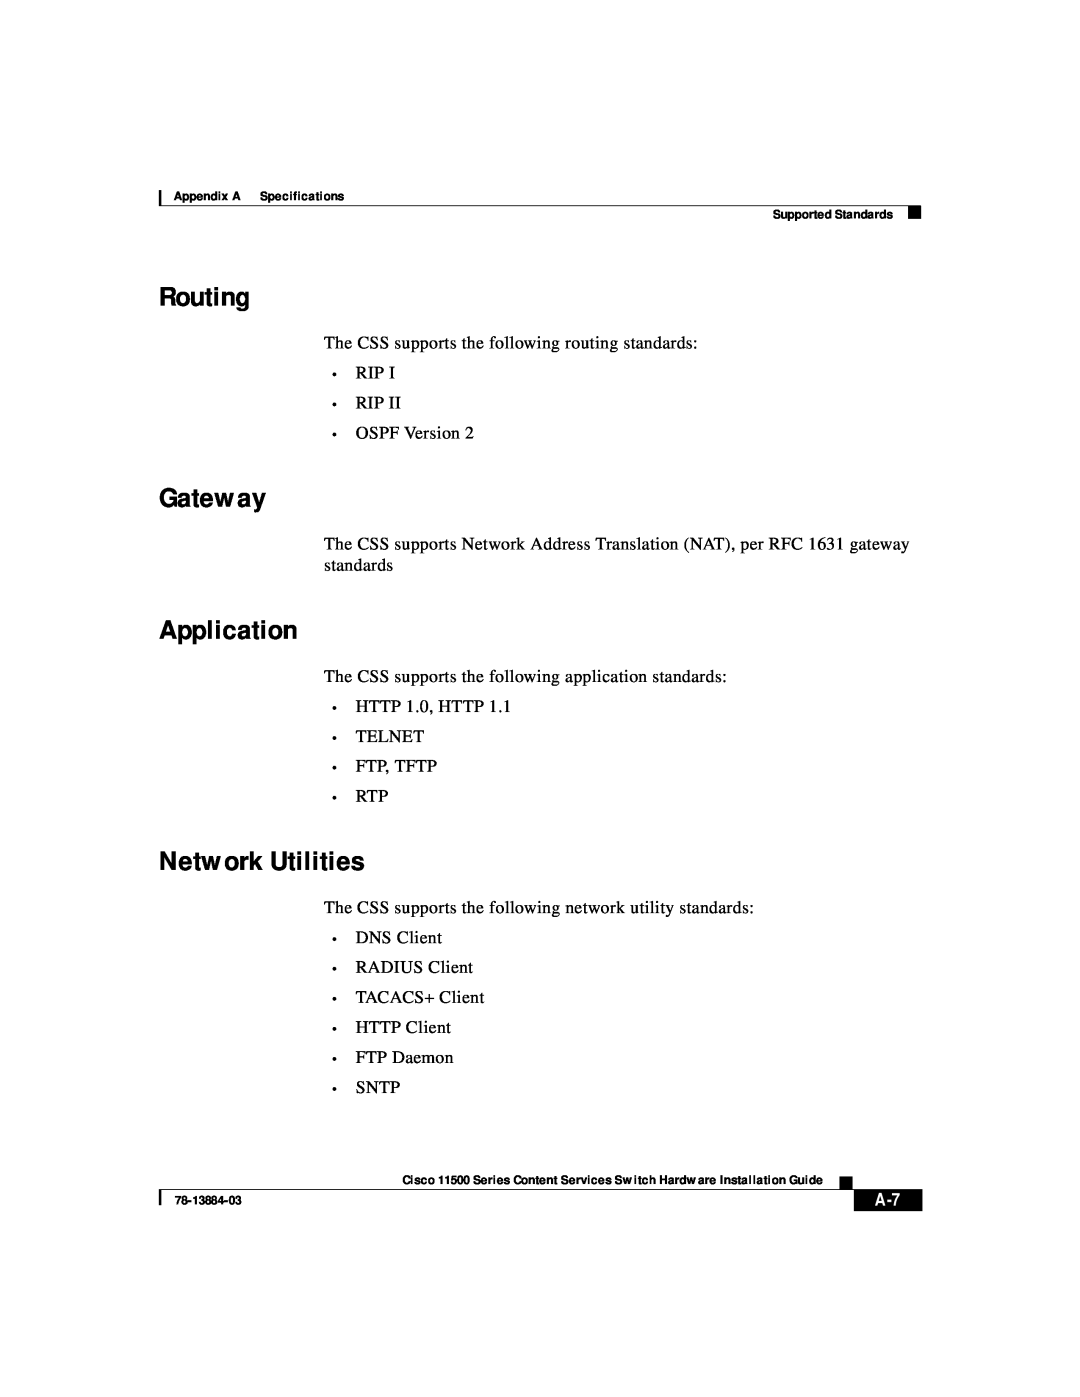 Cisco Systems 11500 Series manual Routing, Gateway, Application, Network Utilities 